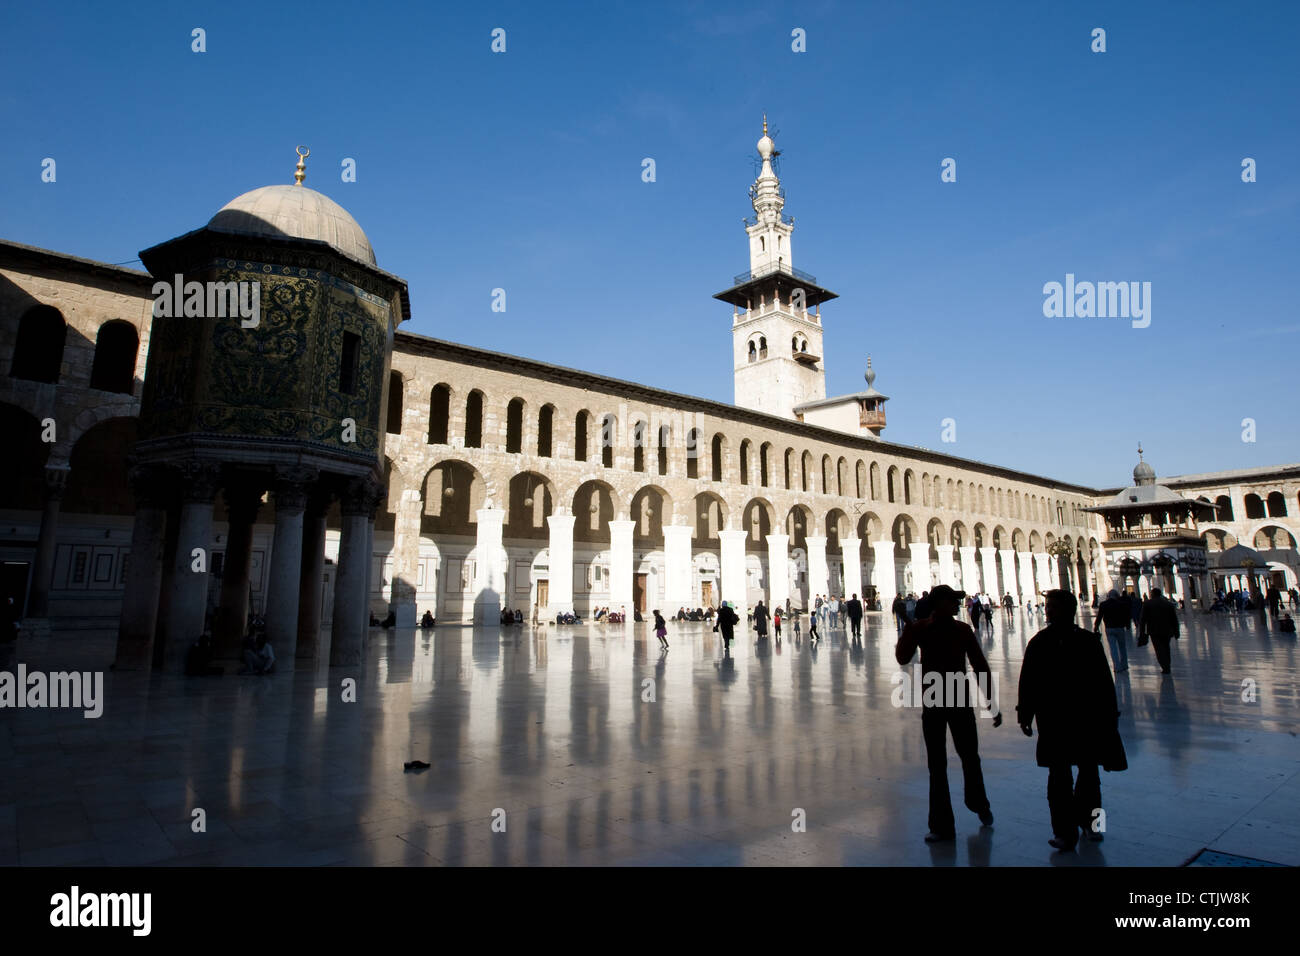 The Umayyad Mosque, the Great Mosque of Damascus, Syria Stock Photo